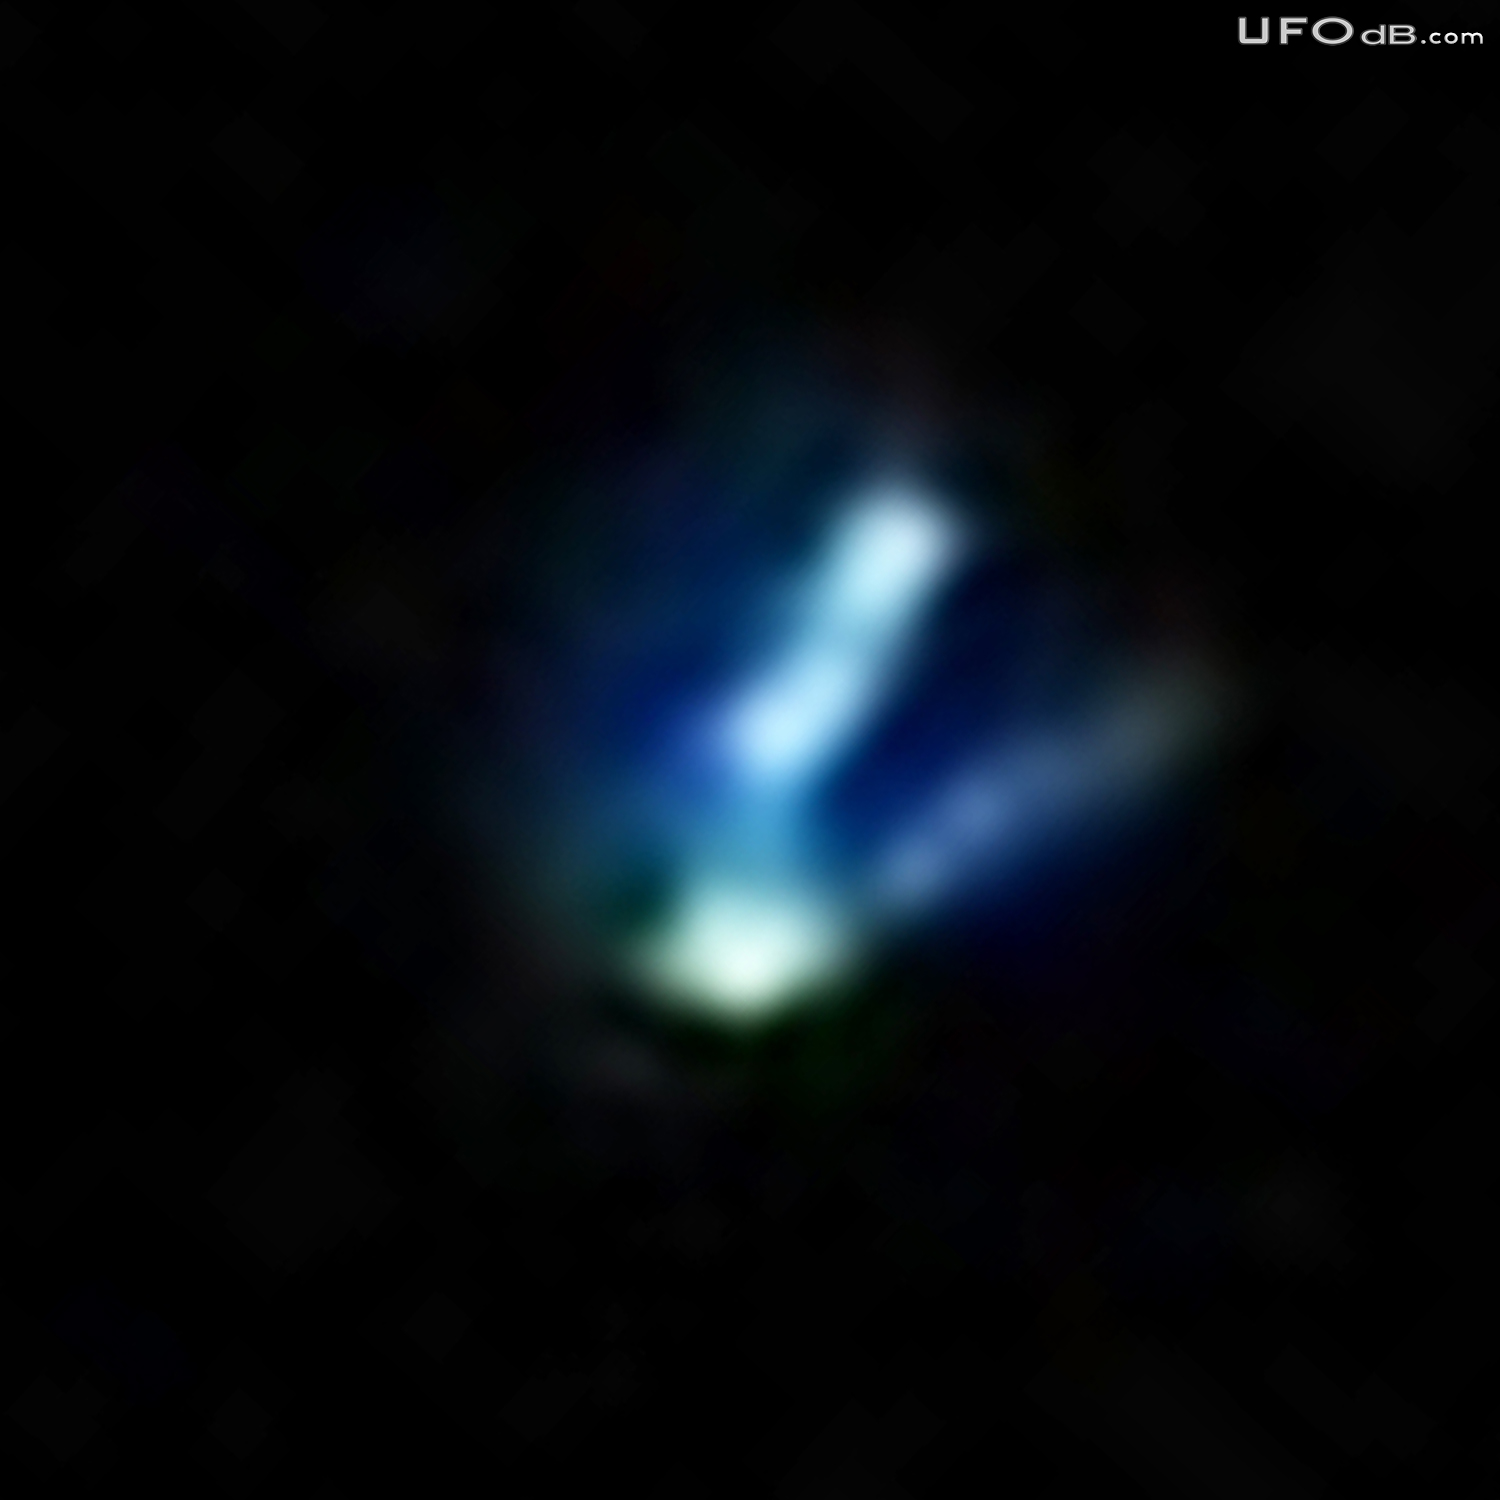 Alien Space Station taken on picture | Alberta Canada | January 2011 UFO Picture #270-4